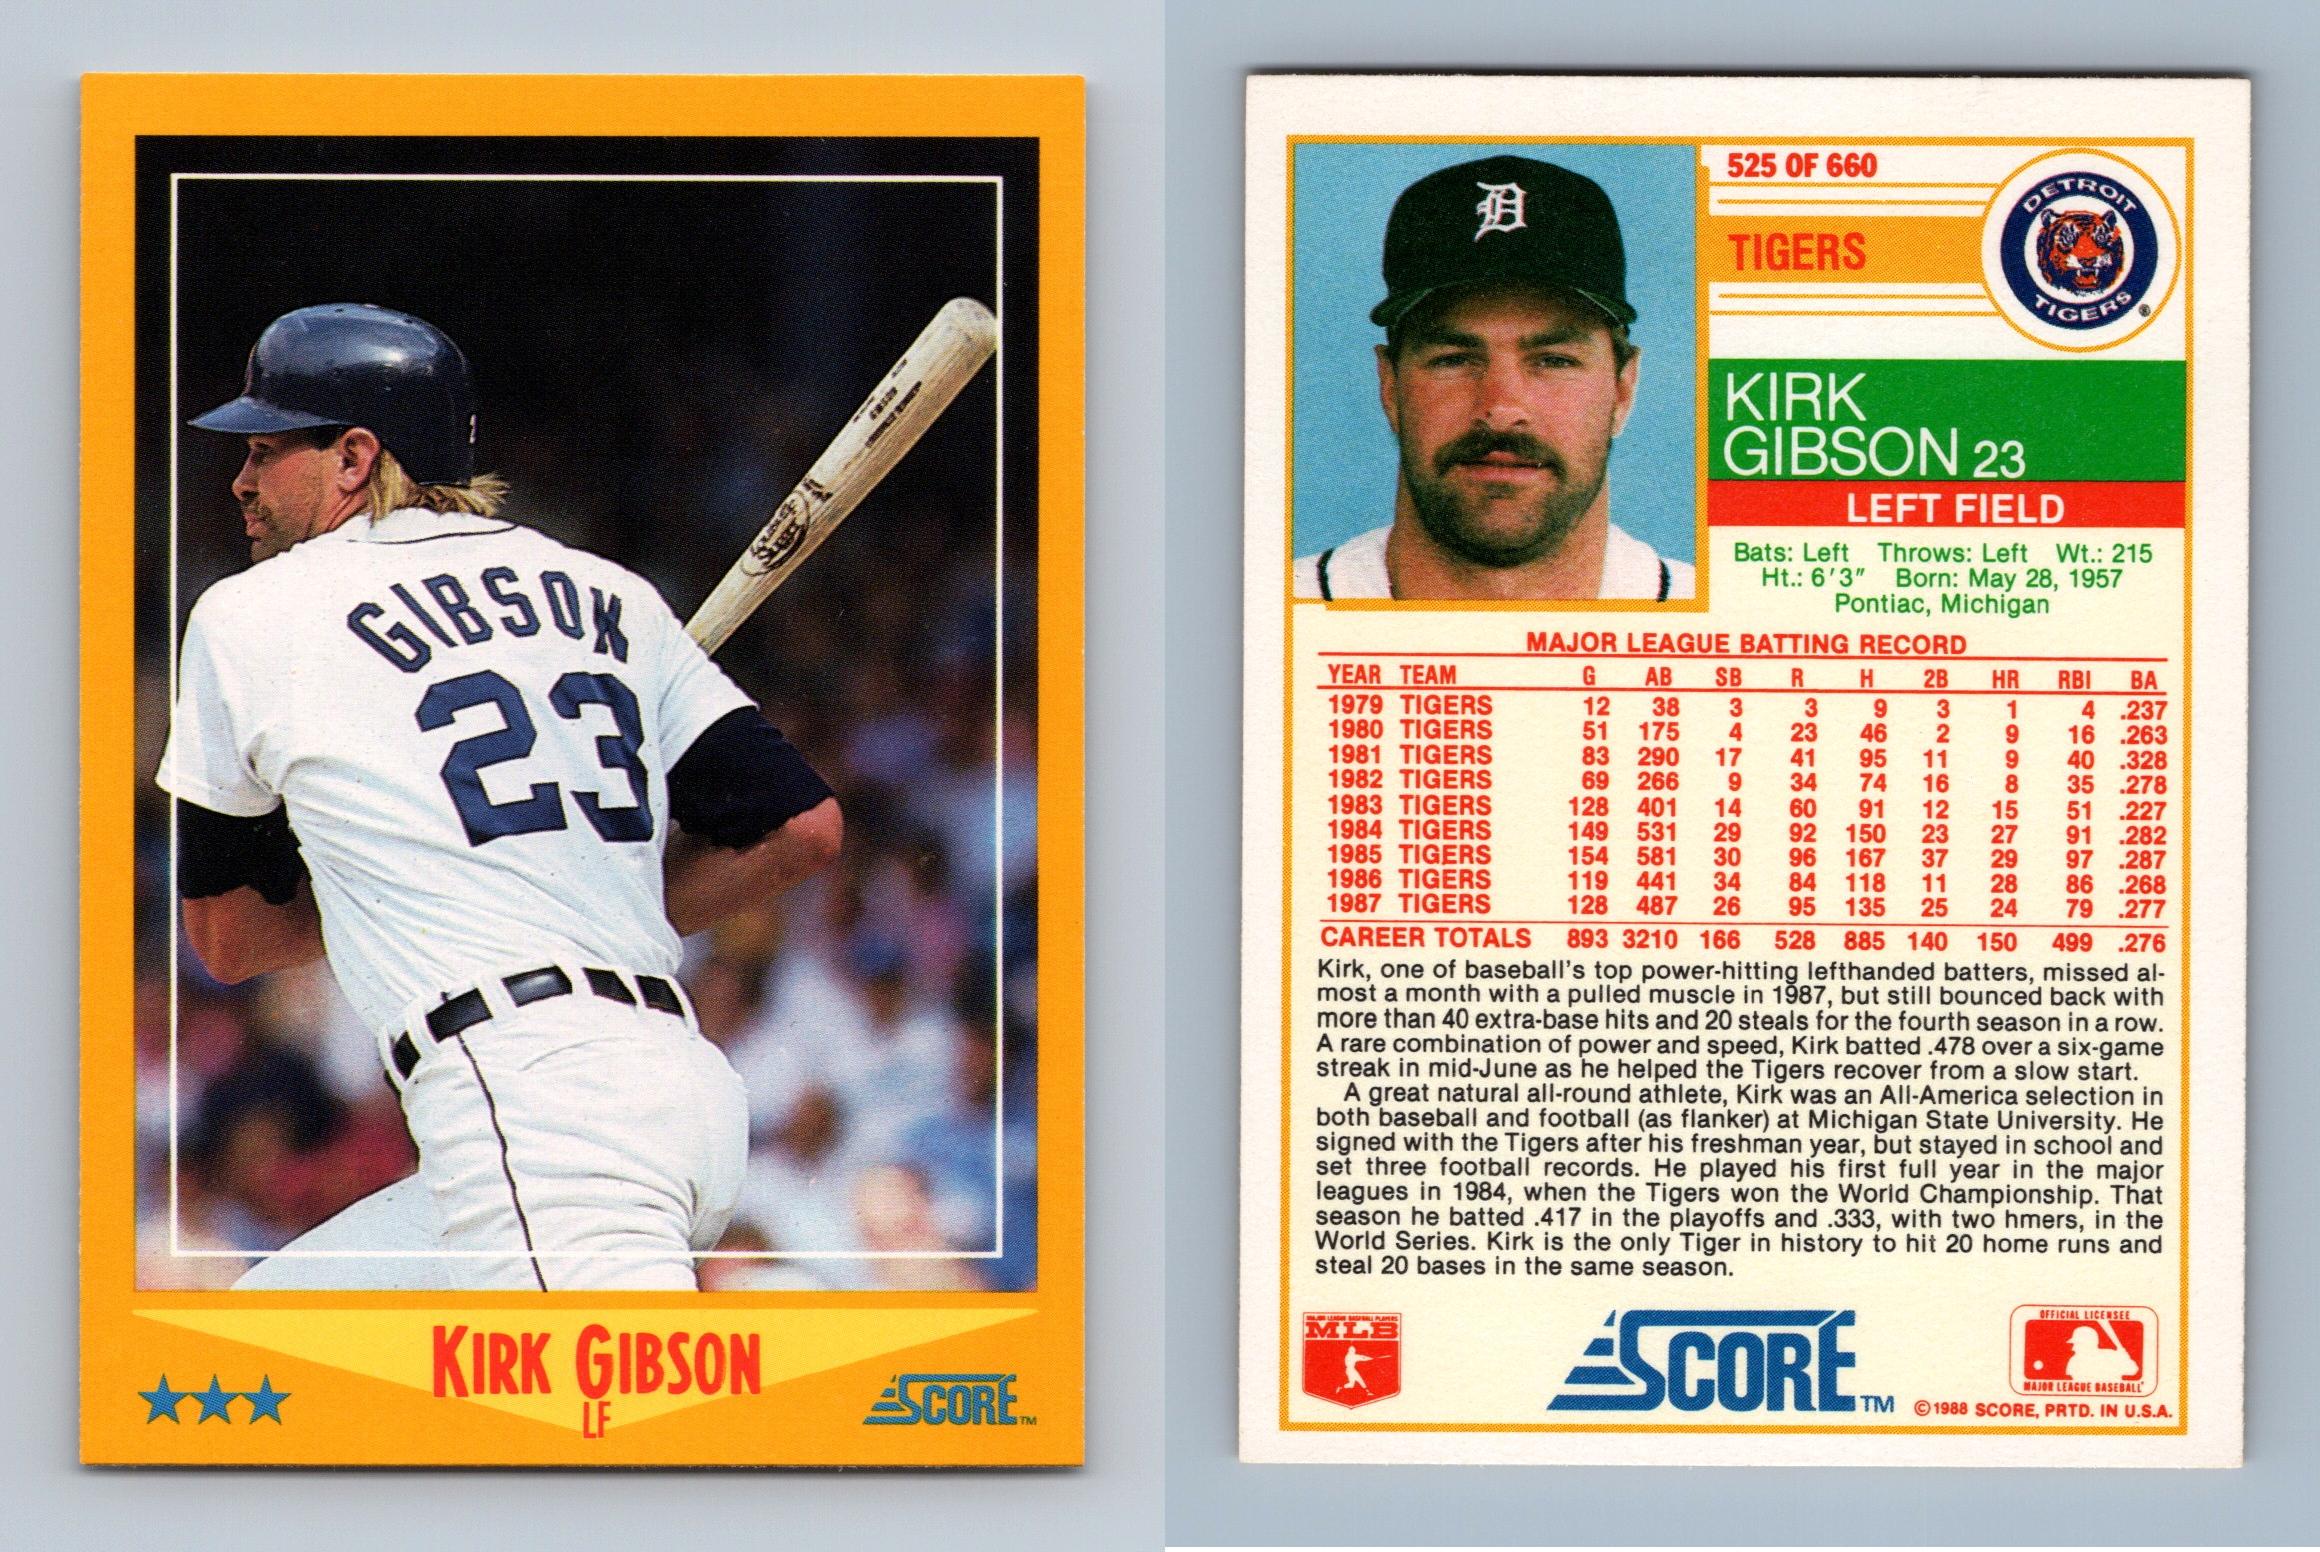 Kirk Gibson Trading Cards: Values, Tracking & Hot Deals